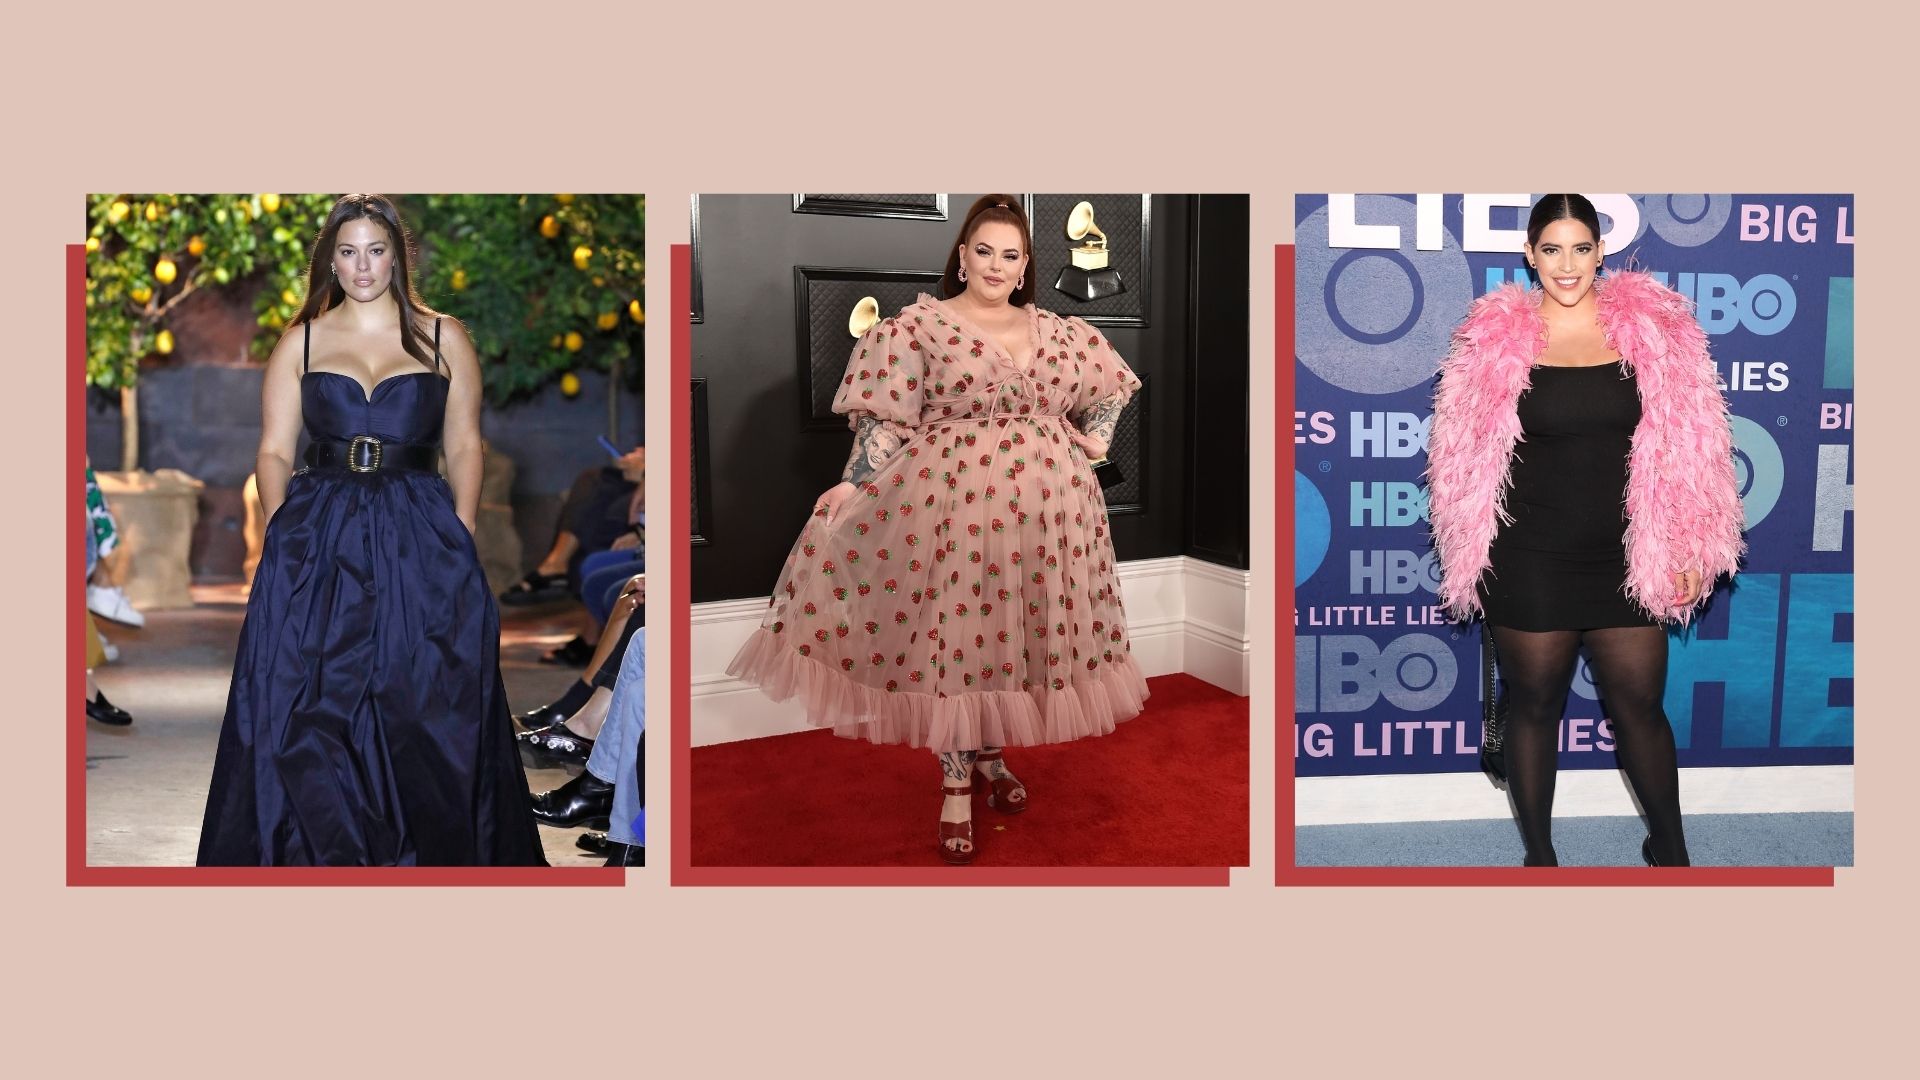 Who is the most famous plus size model?